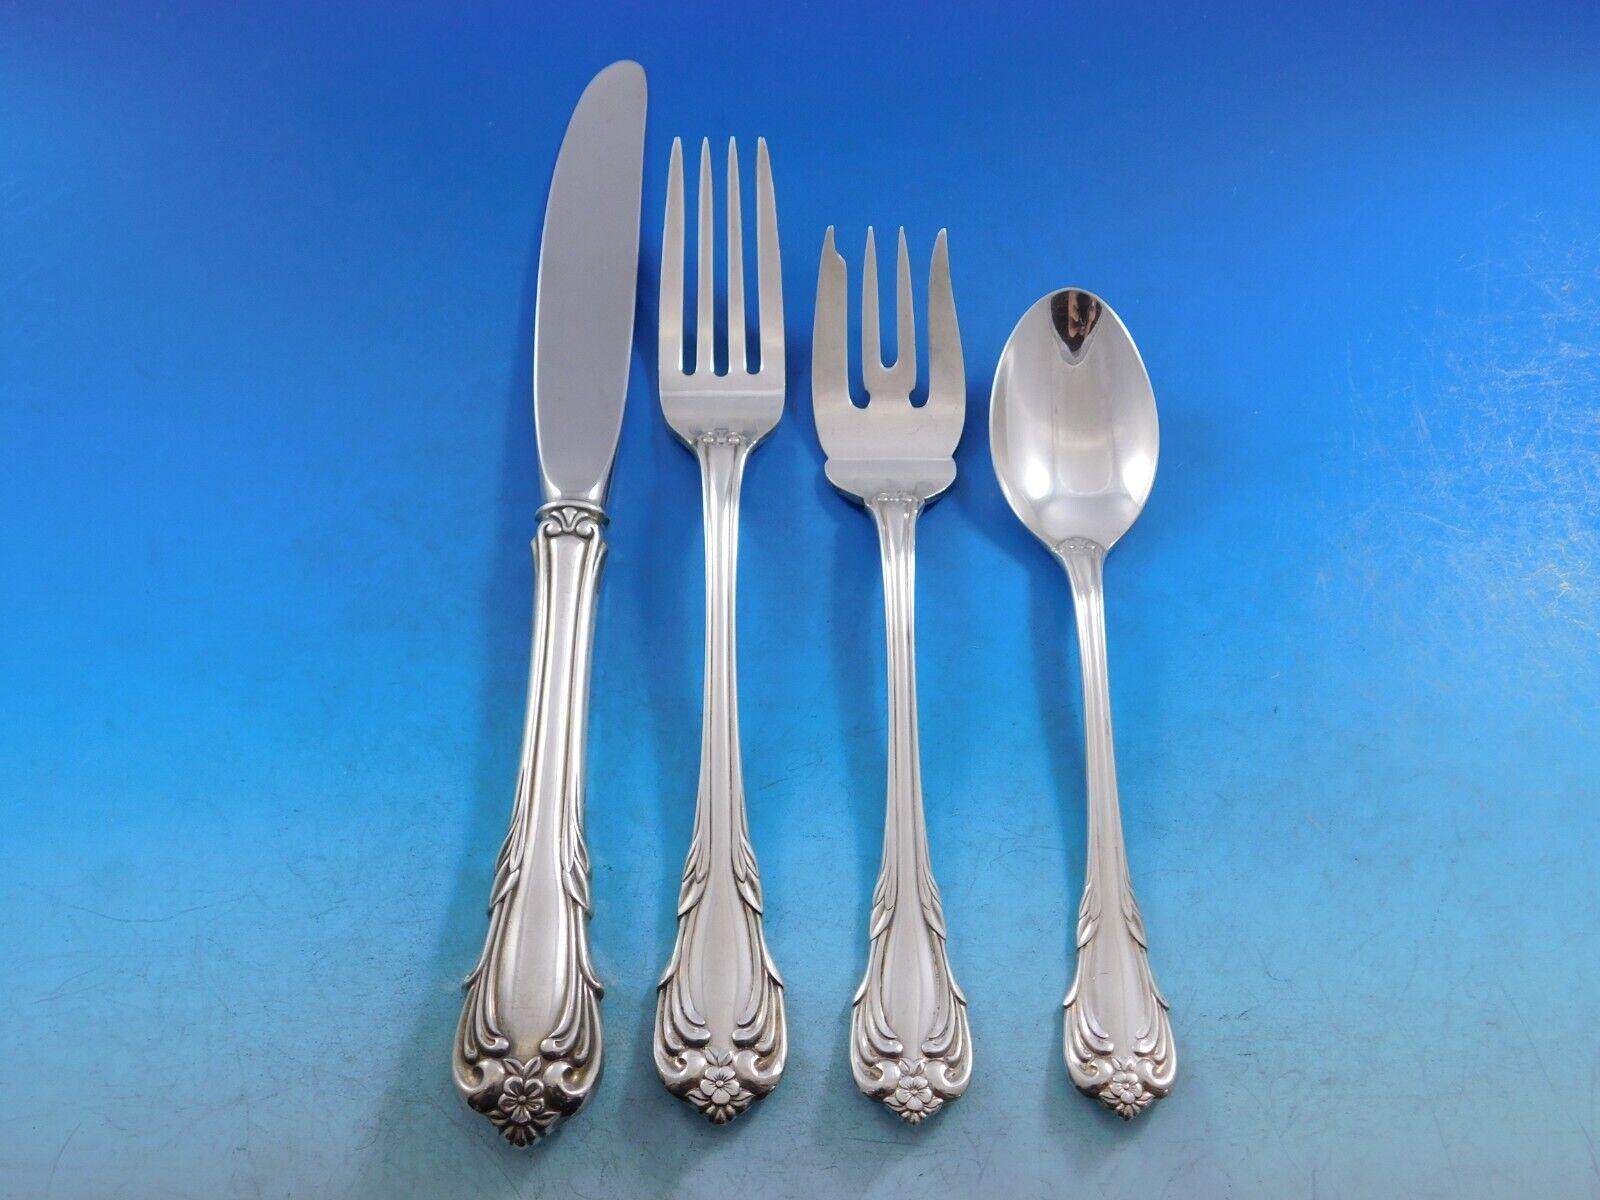 Veranda by Kirk Sterling Silver Flatware Service for 12 Set 61 Pieces Vintage In Excellent Condition For Sale In Big Bend, WI